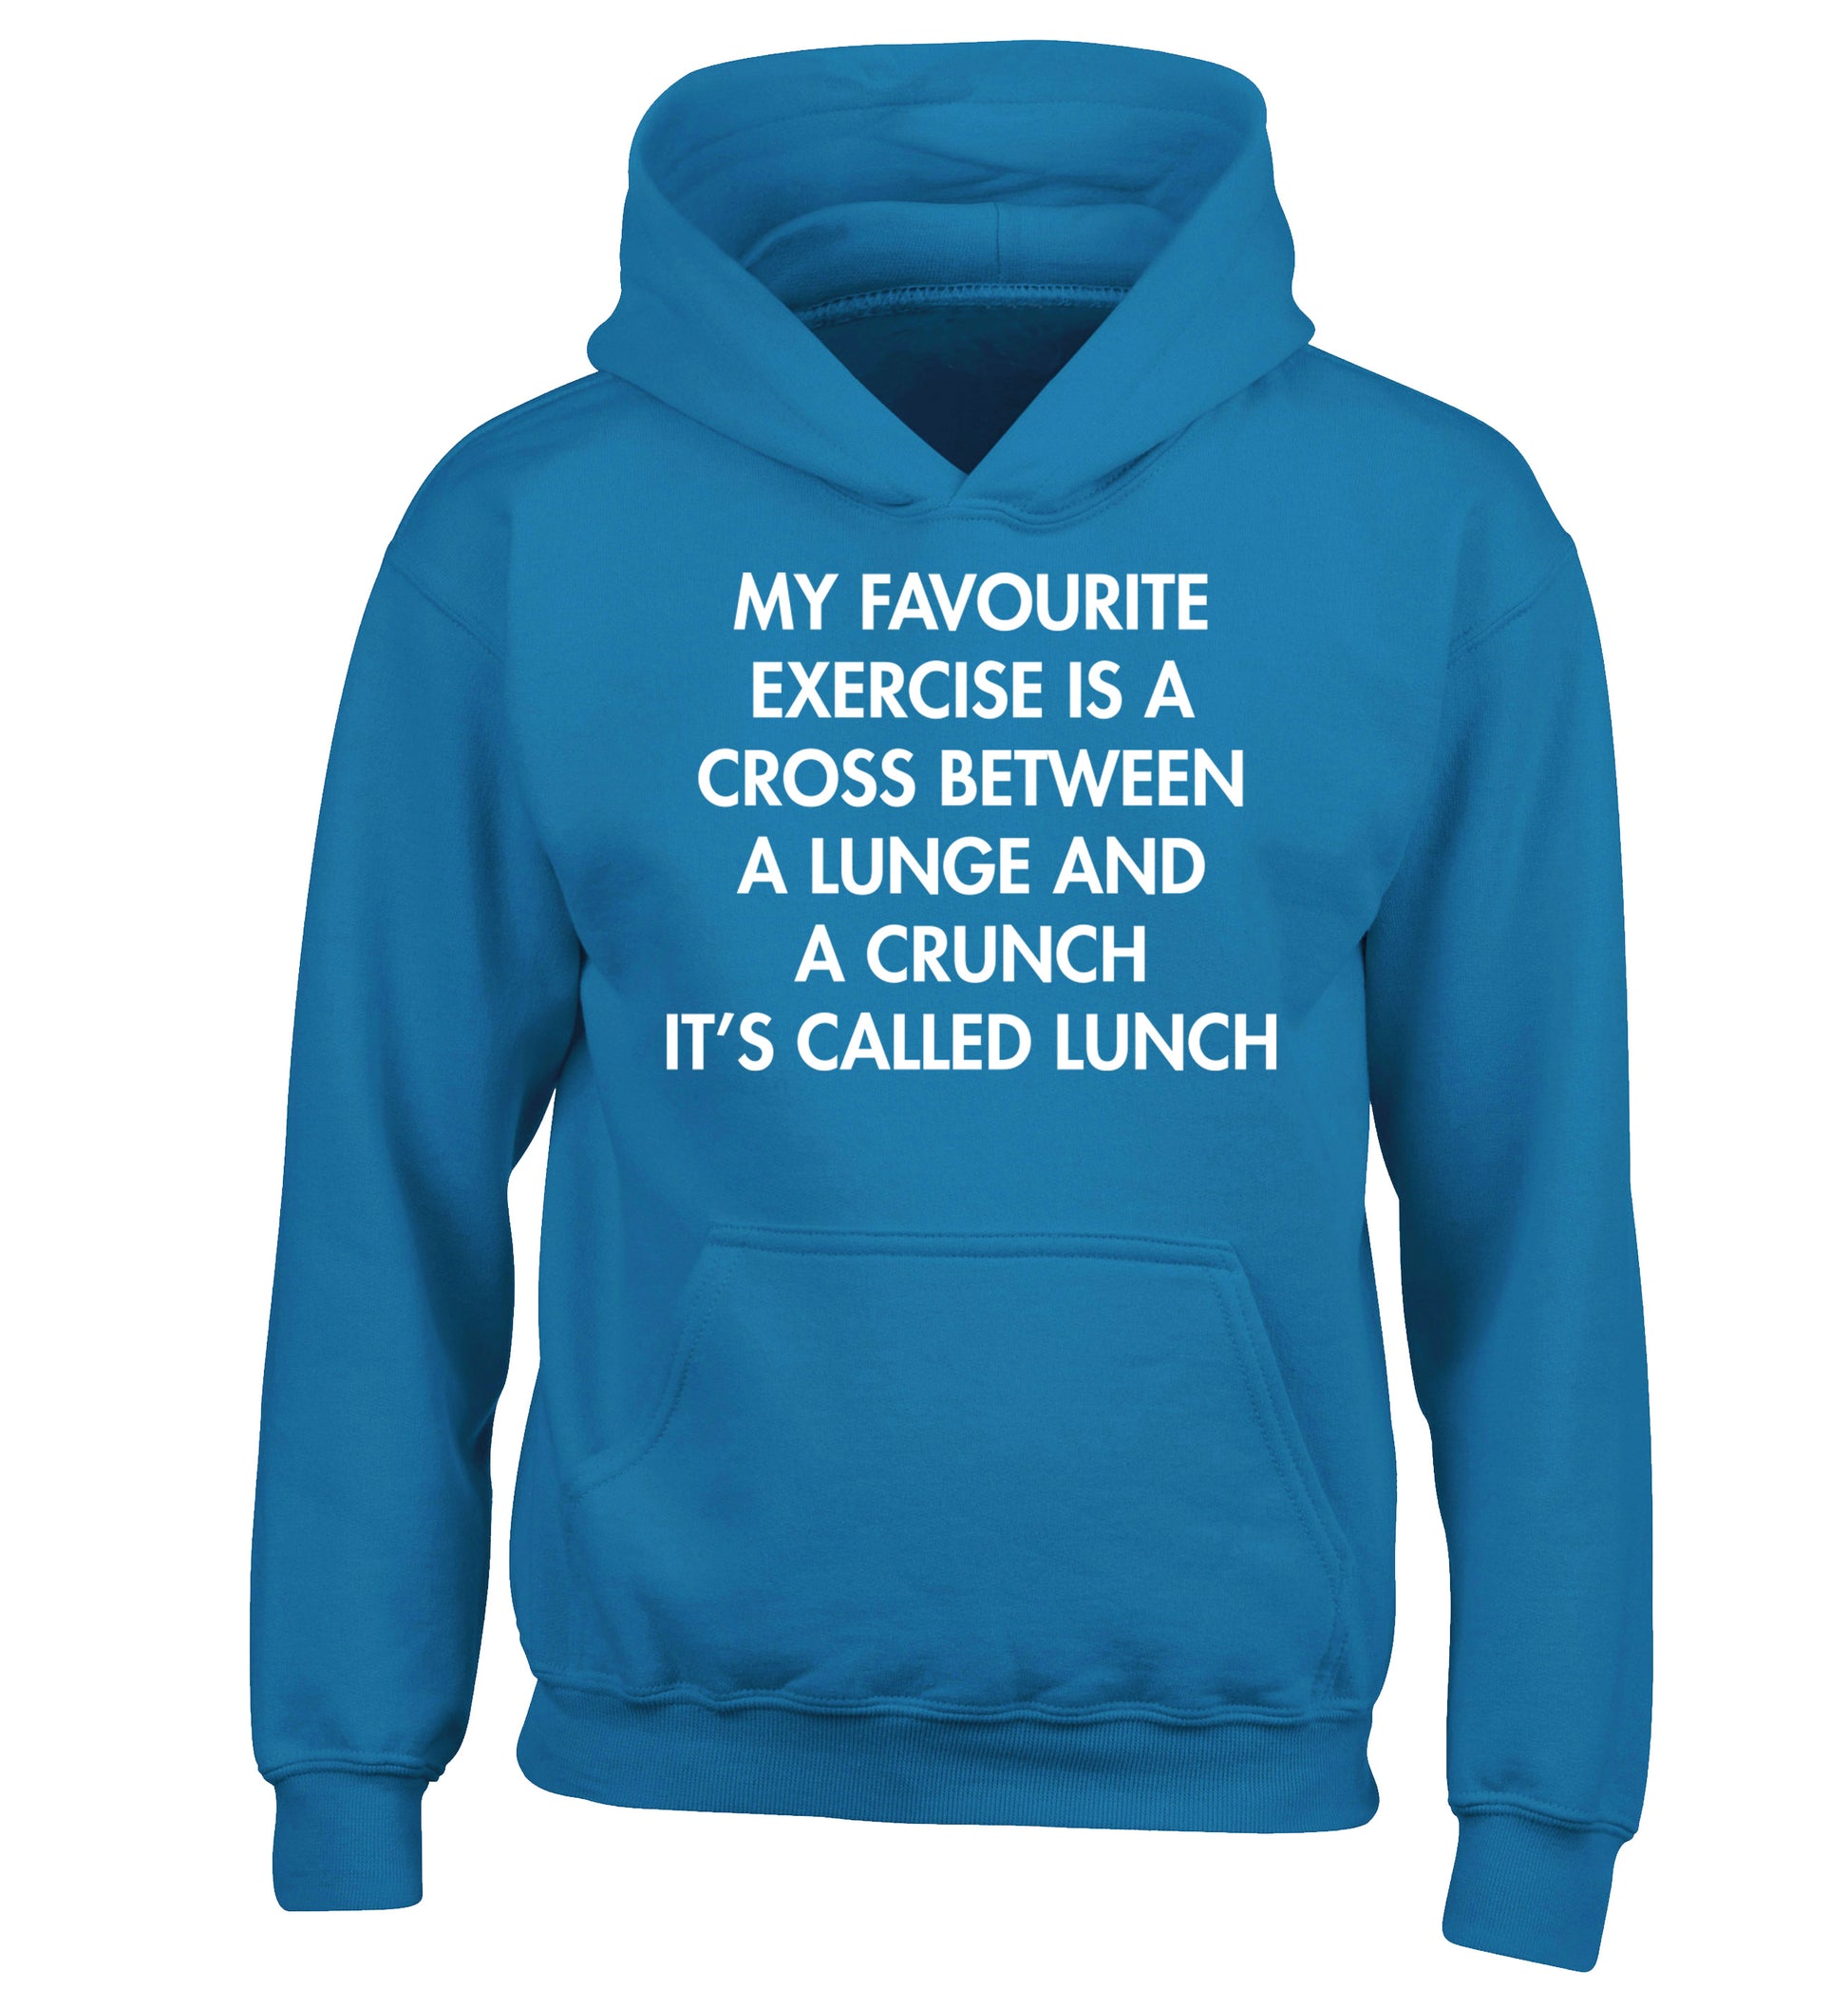 My favourite exercise is a cross between a lung and a crunch it's called lunch children's blue hoodie 12-14 Years